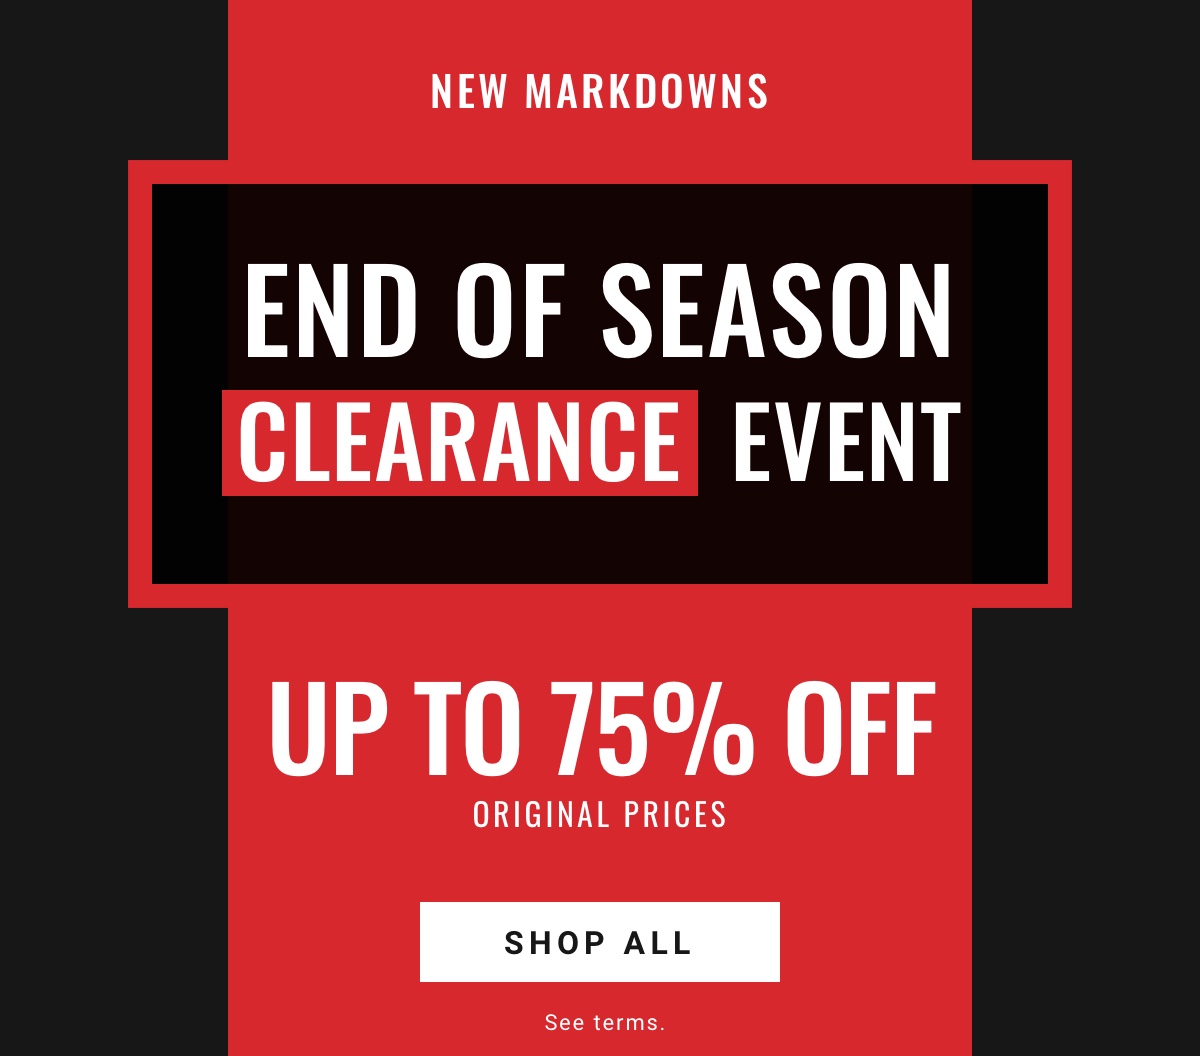 End of Season Clearance Event Up to 75% off original prices